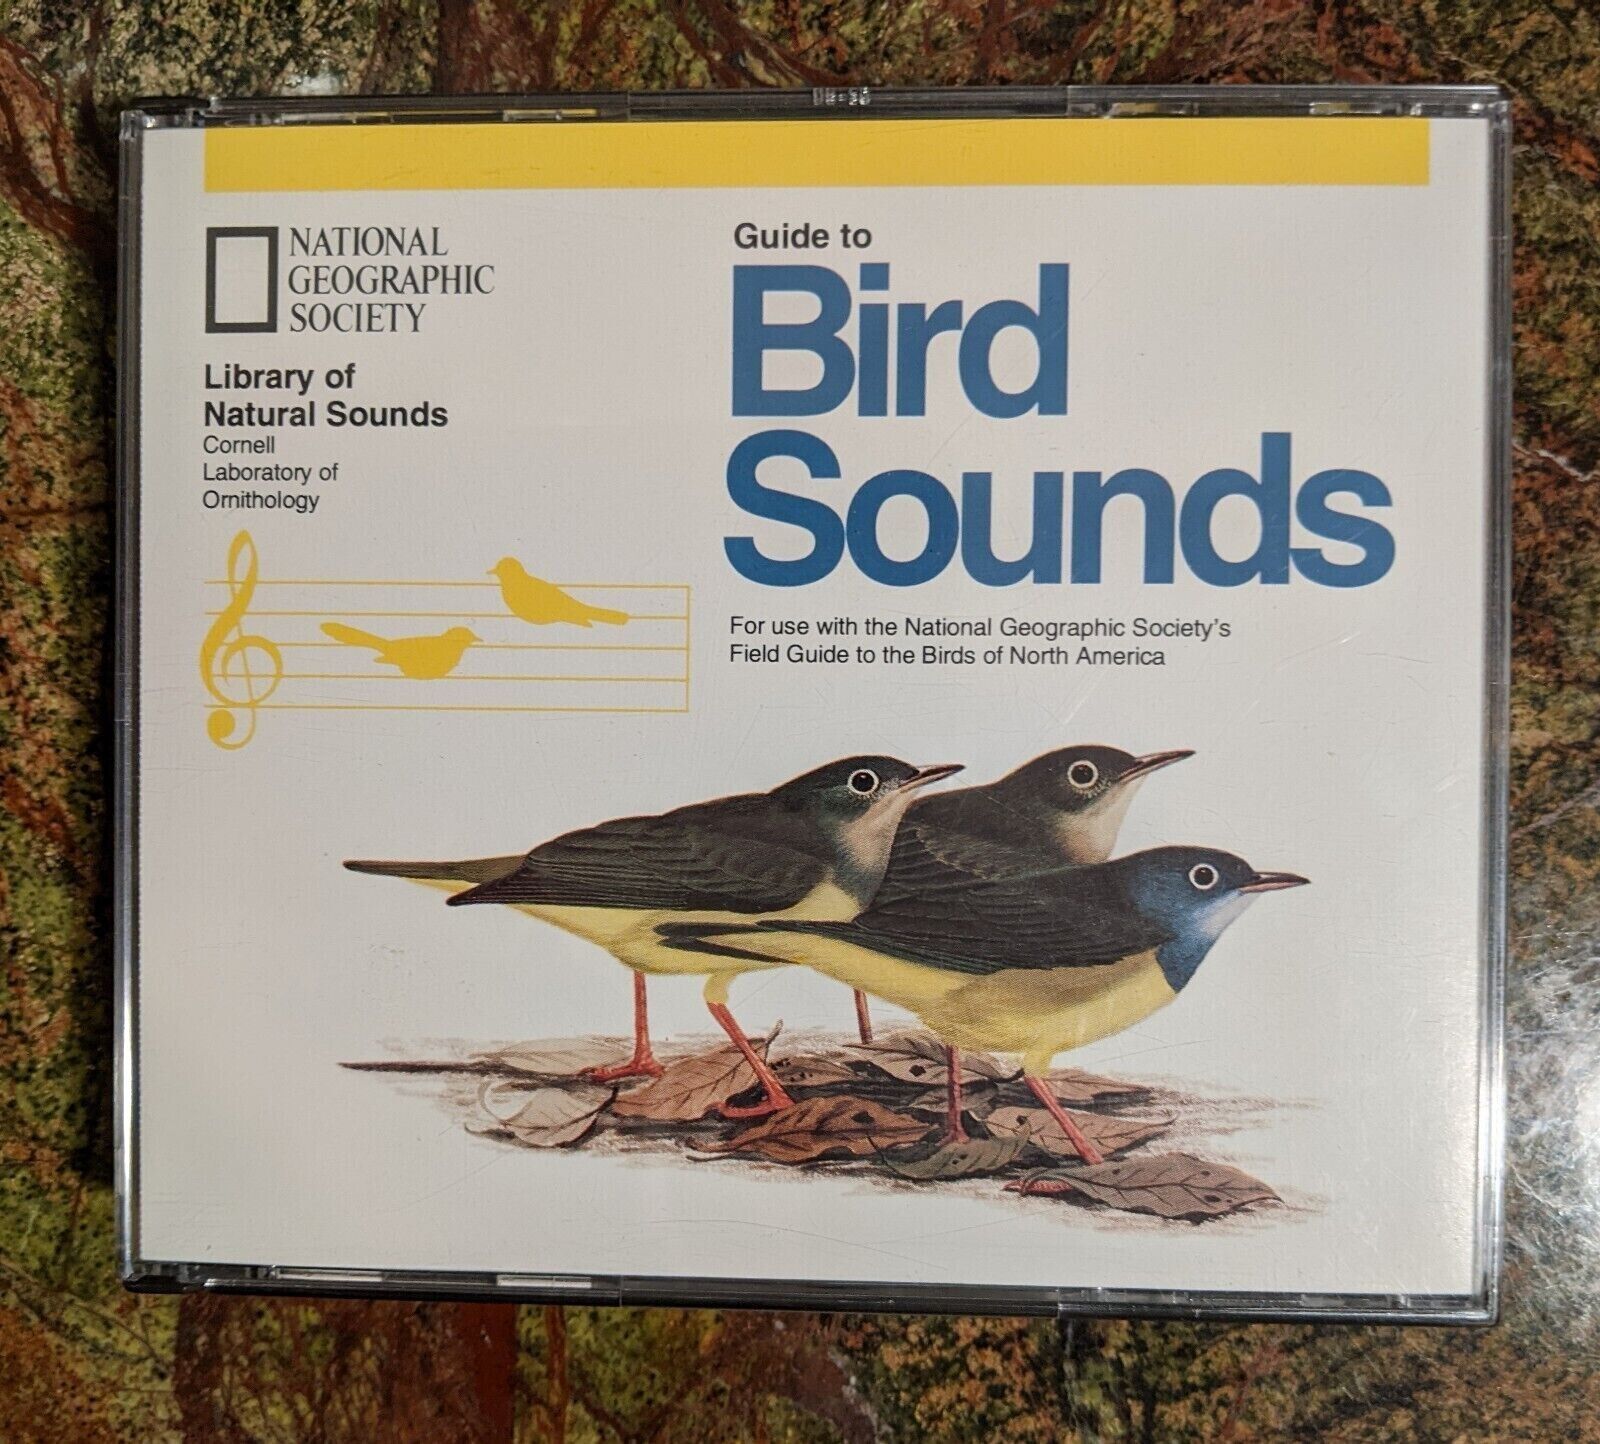 National Geographic Society Guide To Bird Sounds 2 CD set, Like New